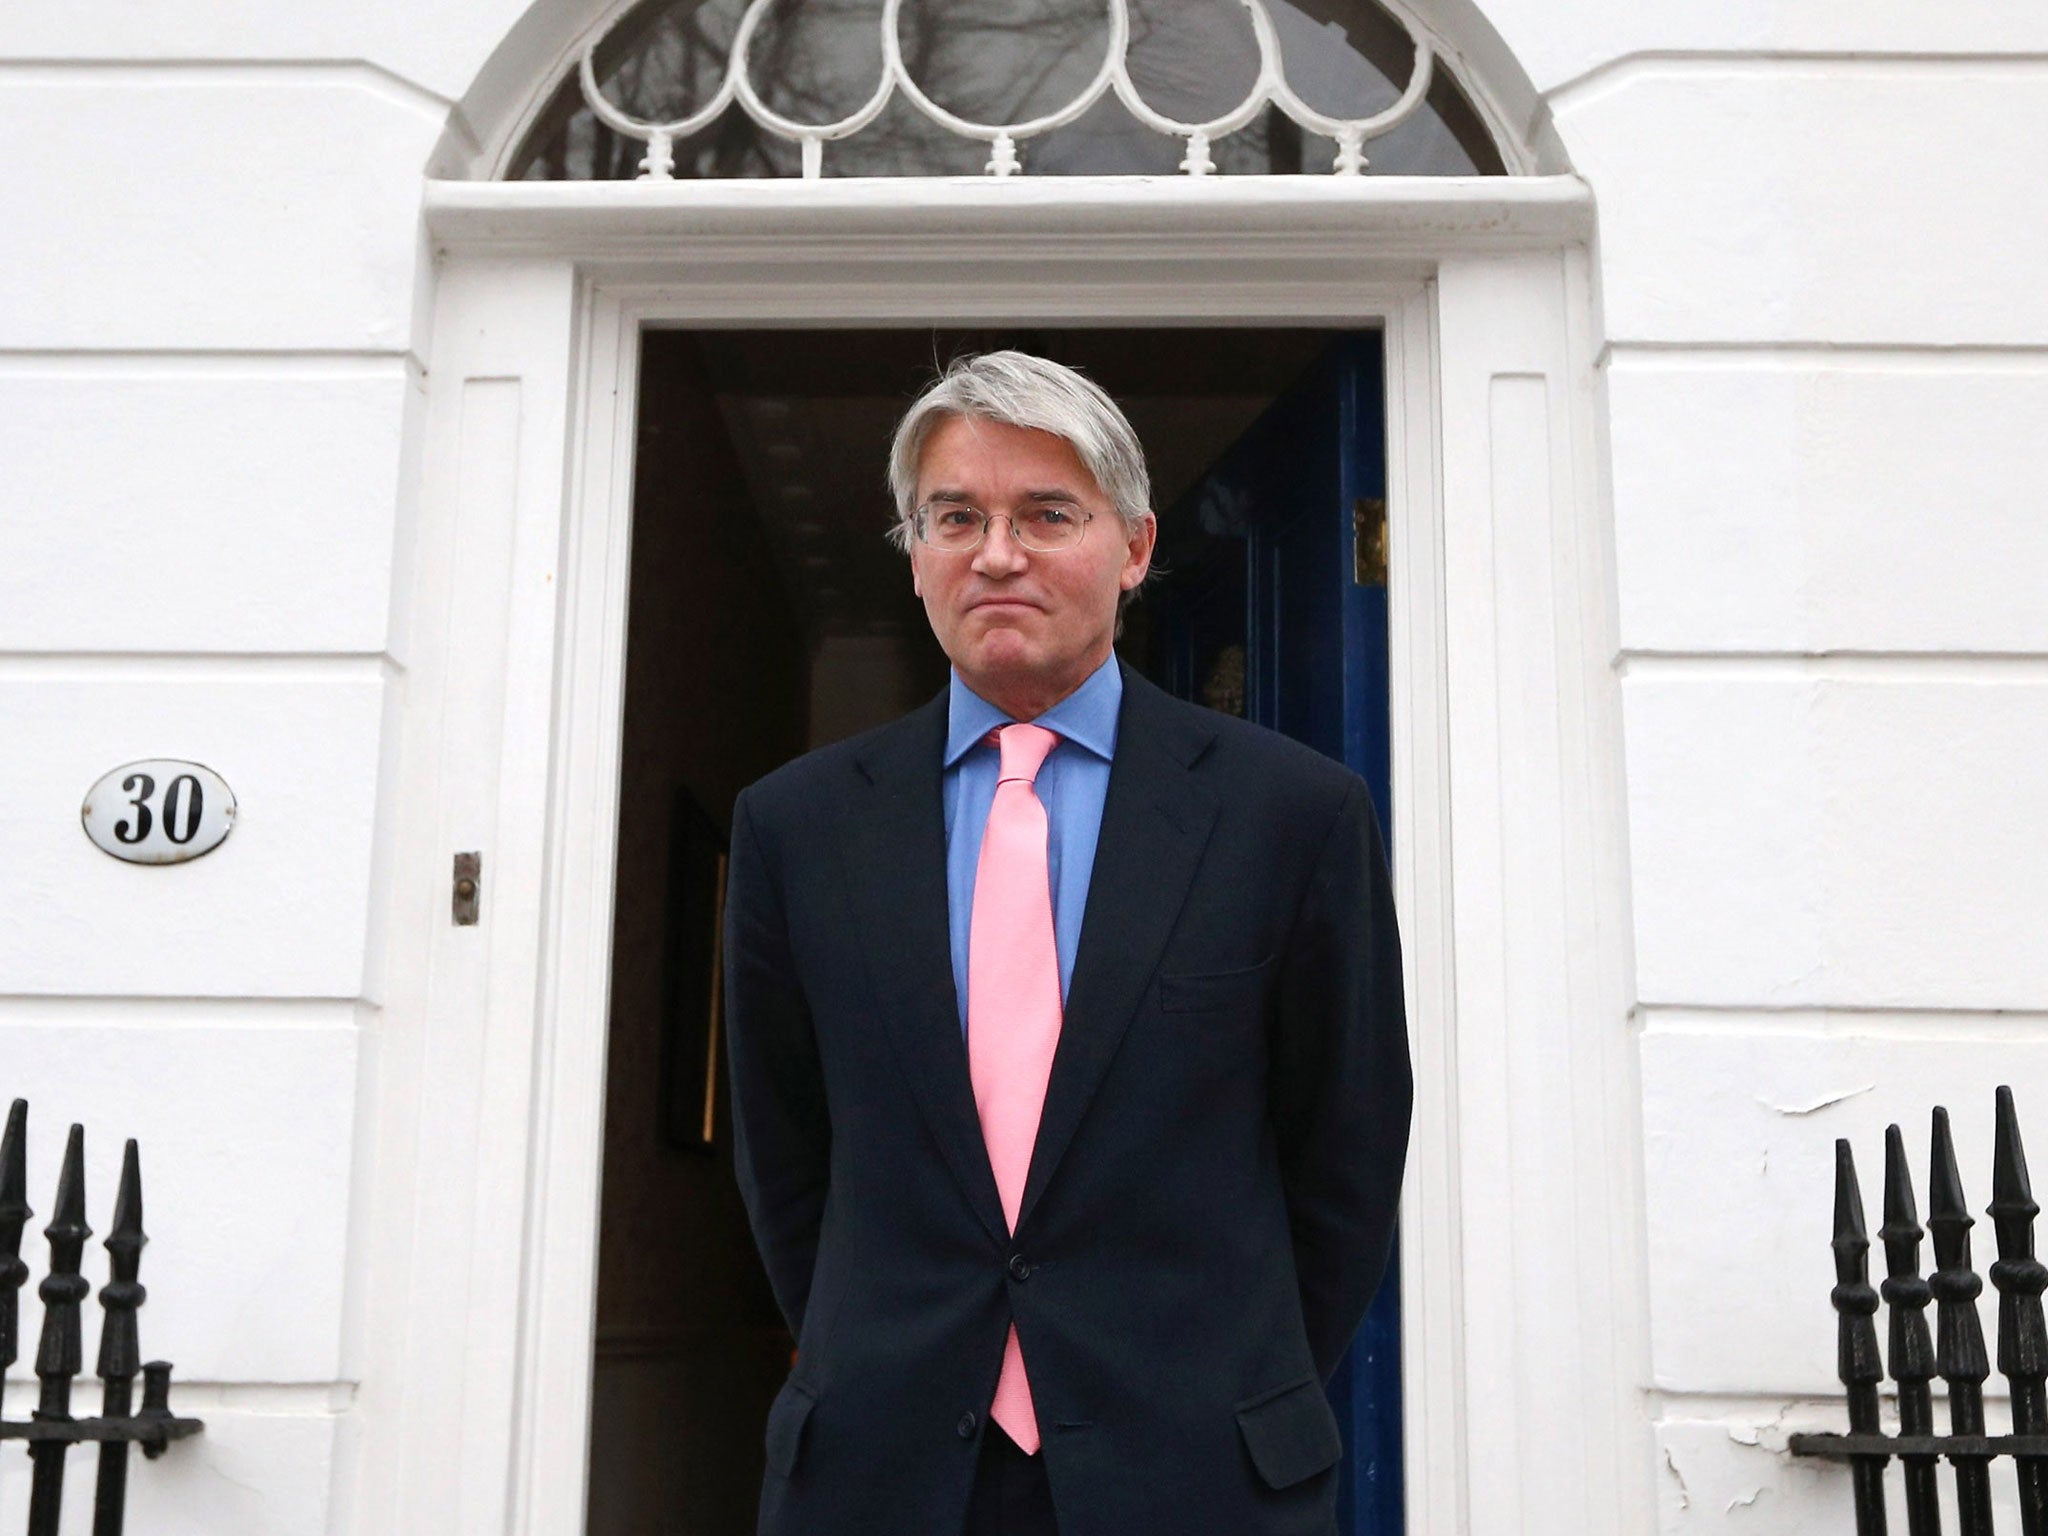 Andrew Mitchell: The former chief whip wants an inquiry into allegations that police fabricated evidence